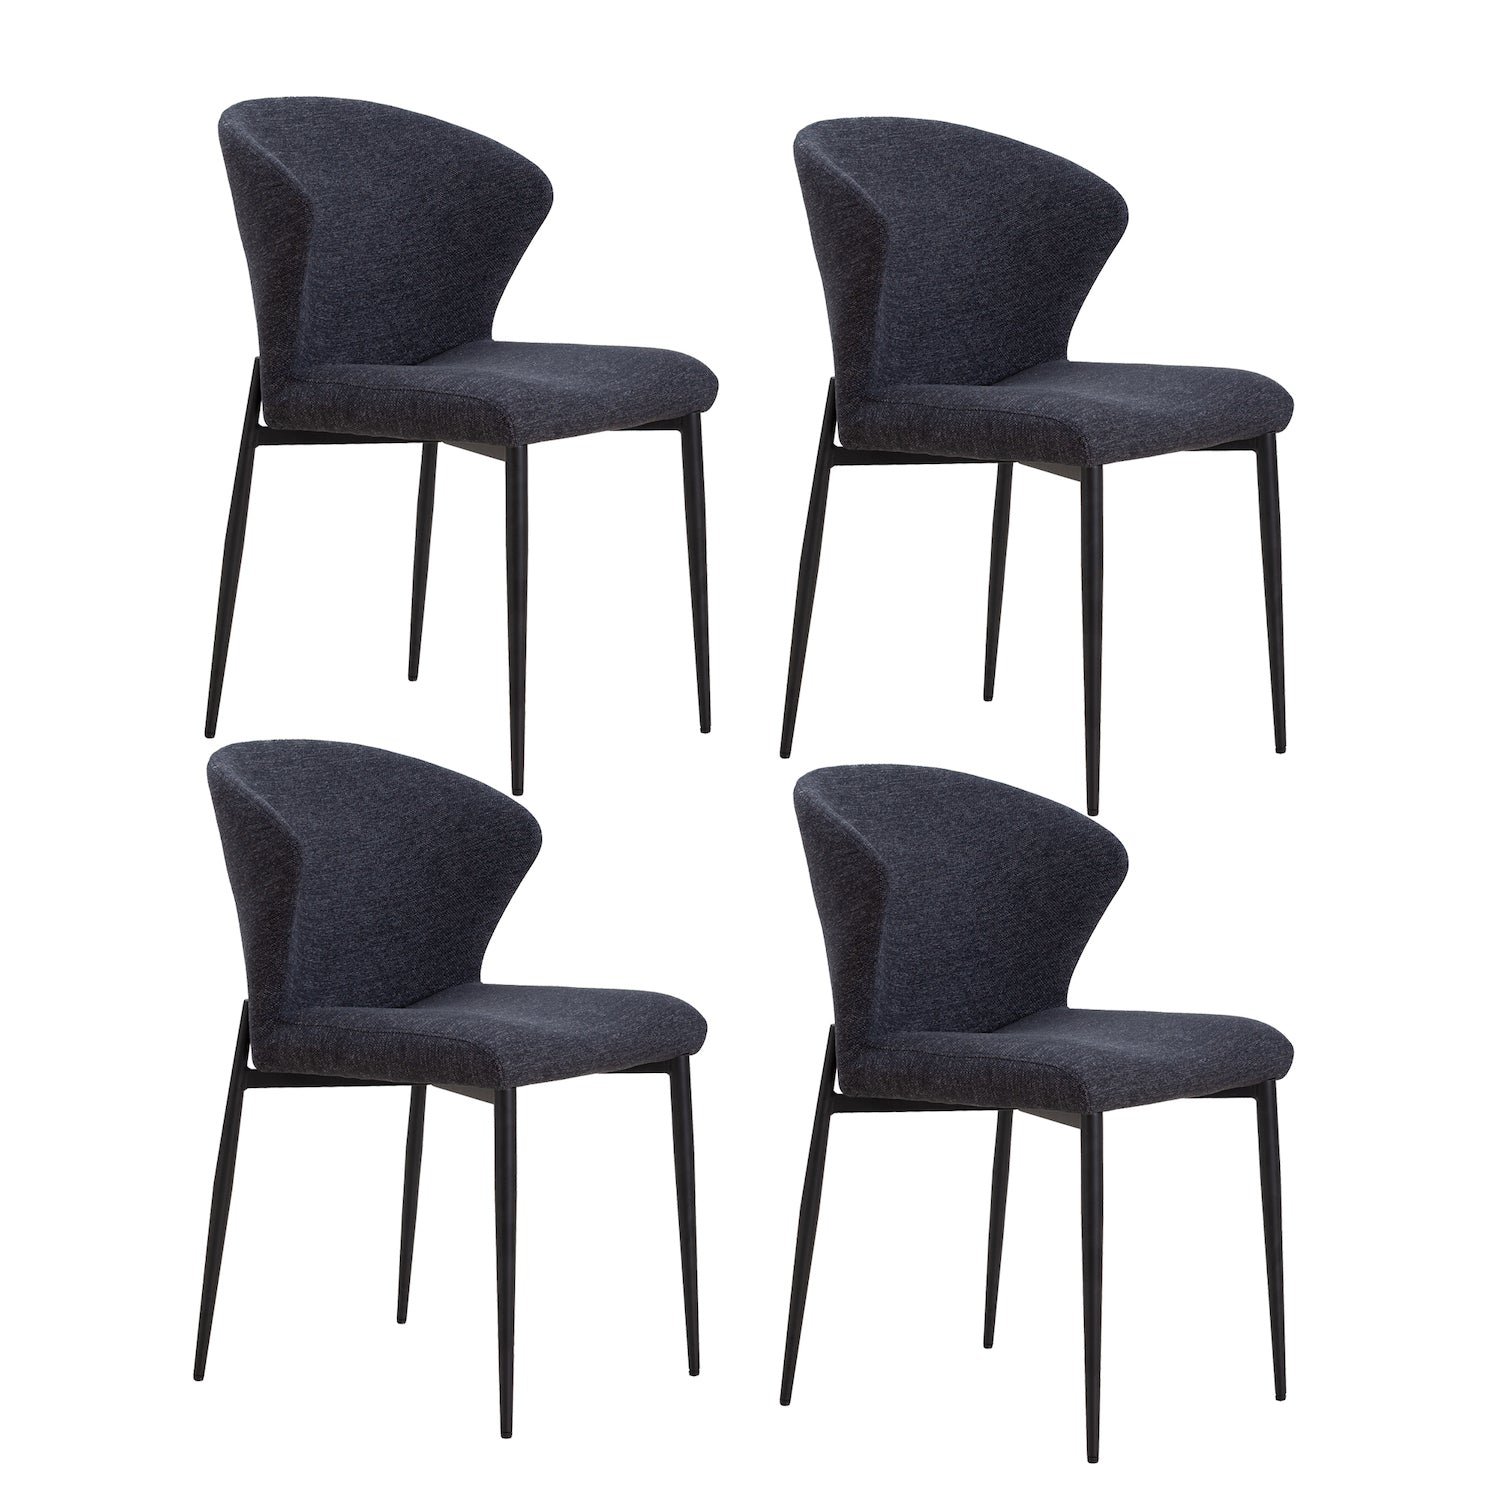 Justone Modern Linen Dining Side Chairs Set of 4 Dark Gray